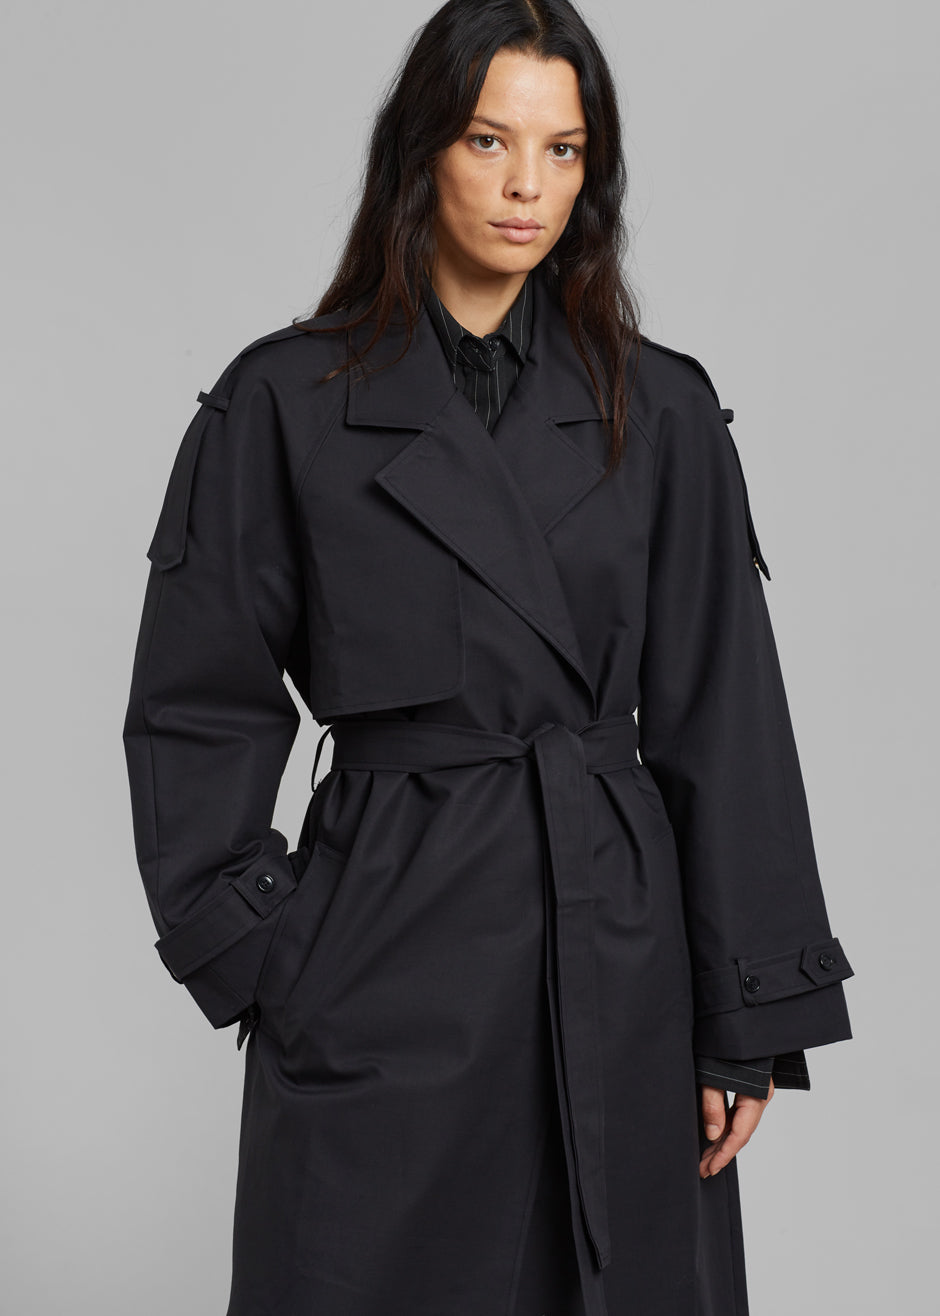 Suzanne Trench Coat - Black - 4